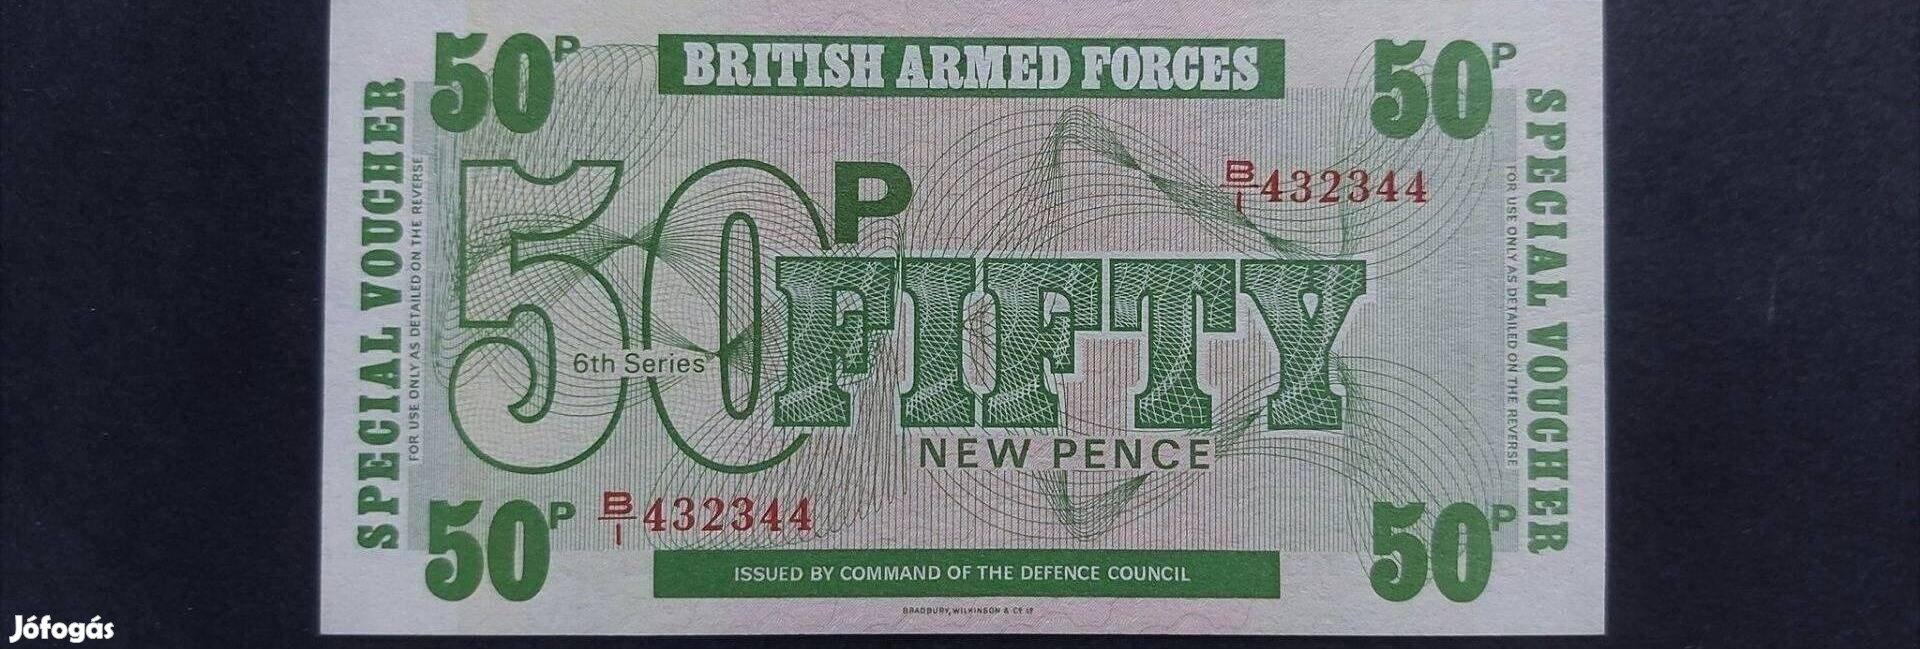 1972 / 50 Pence UNC British Armed Forces (5)